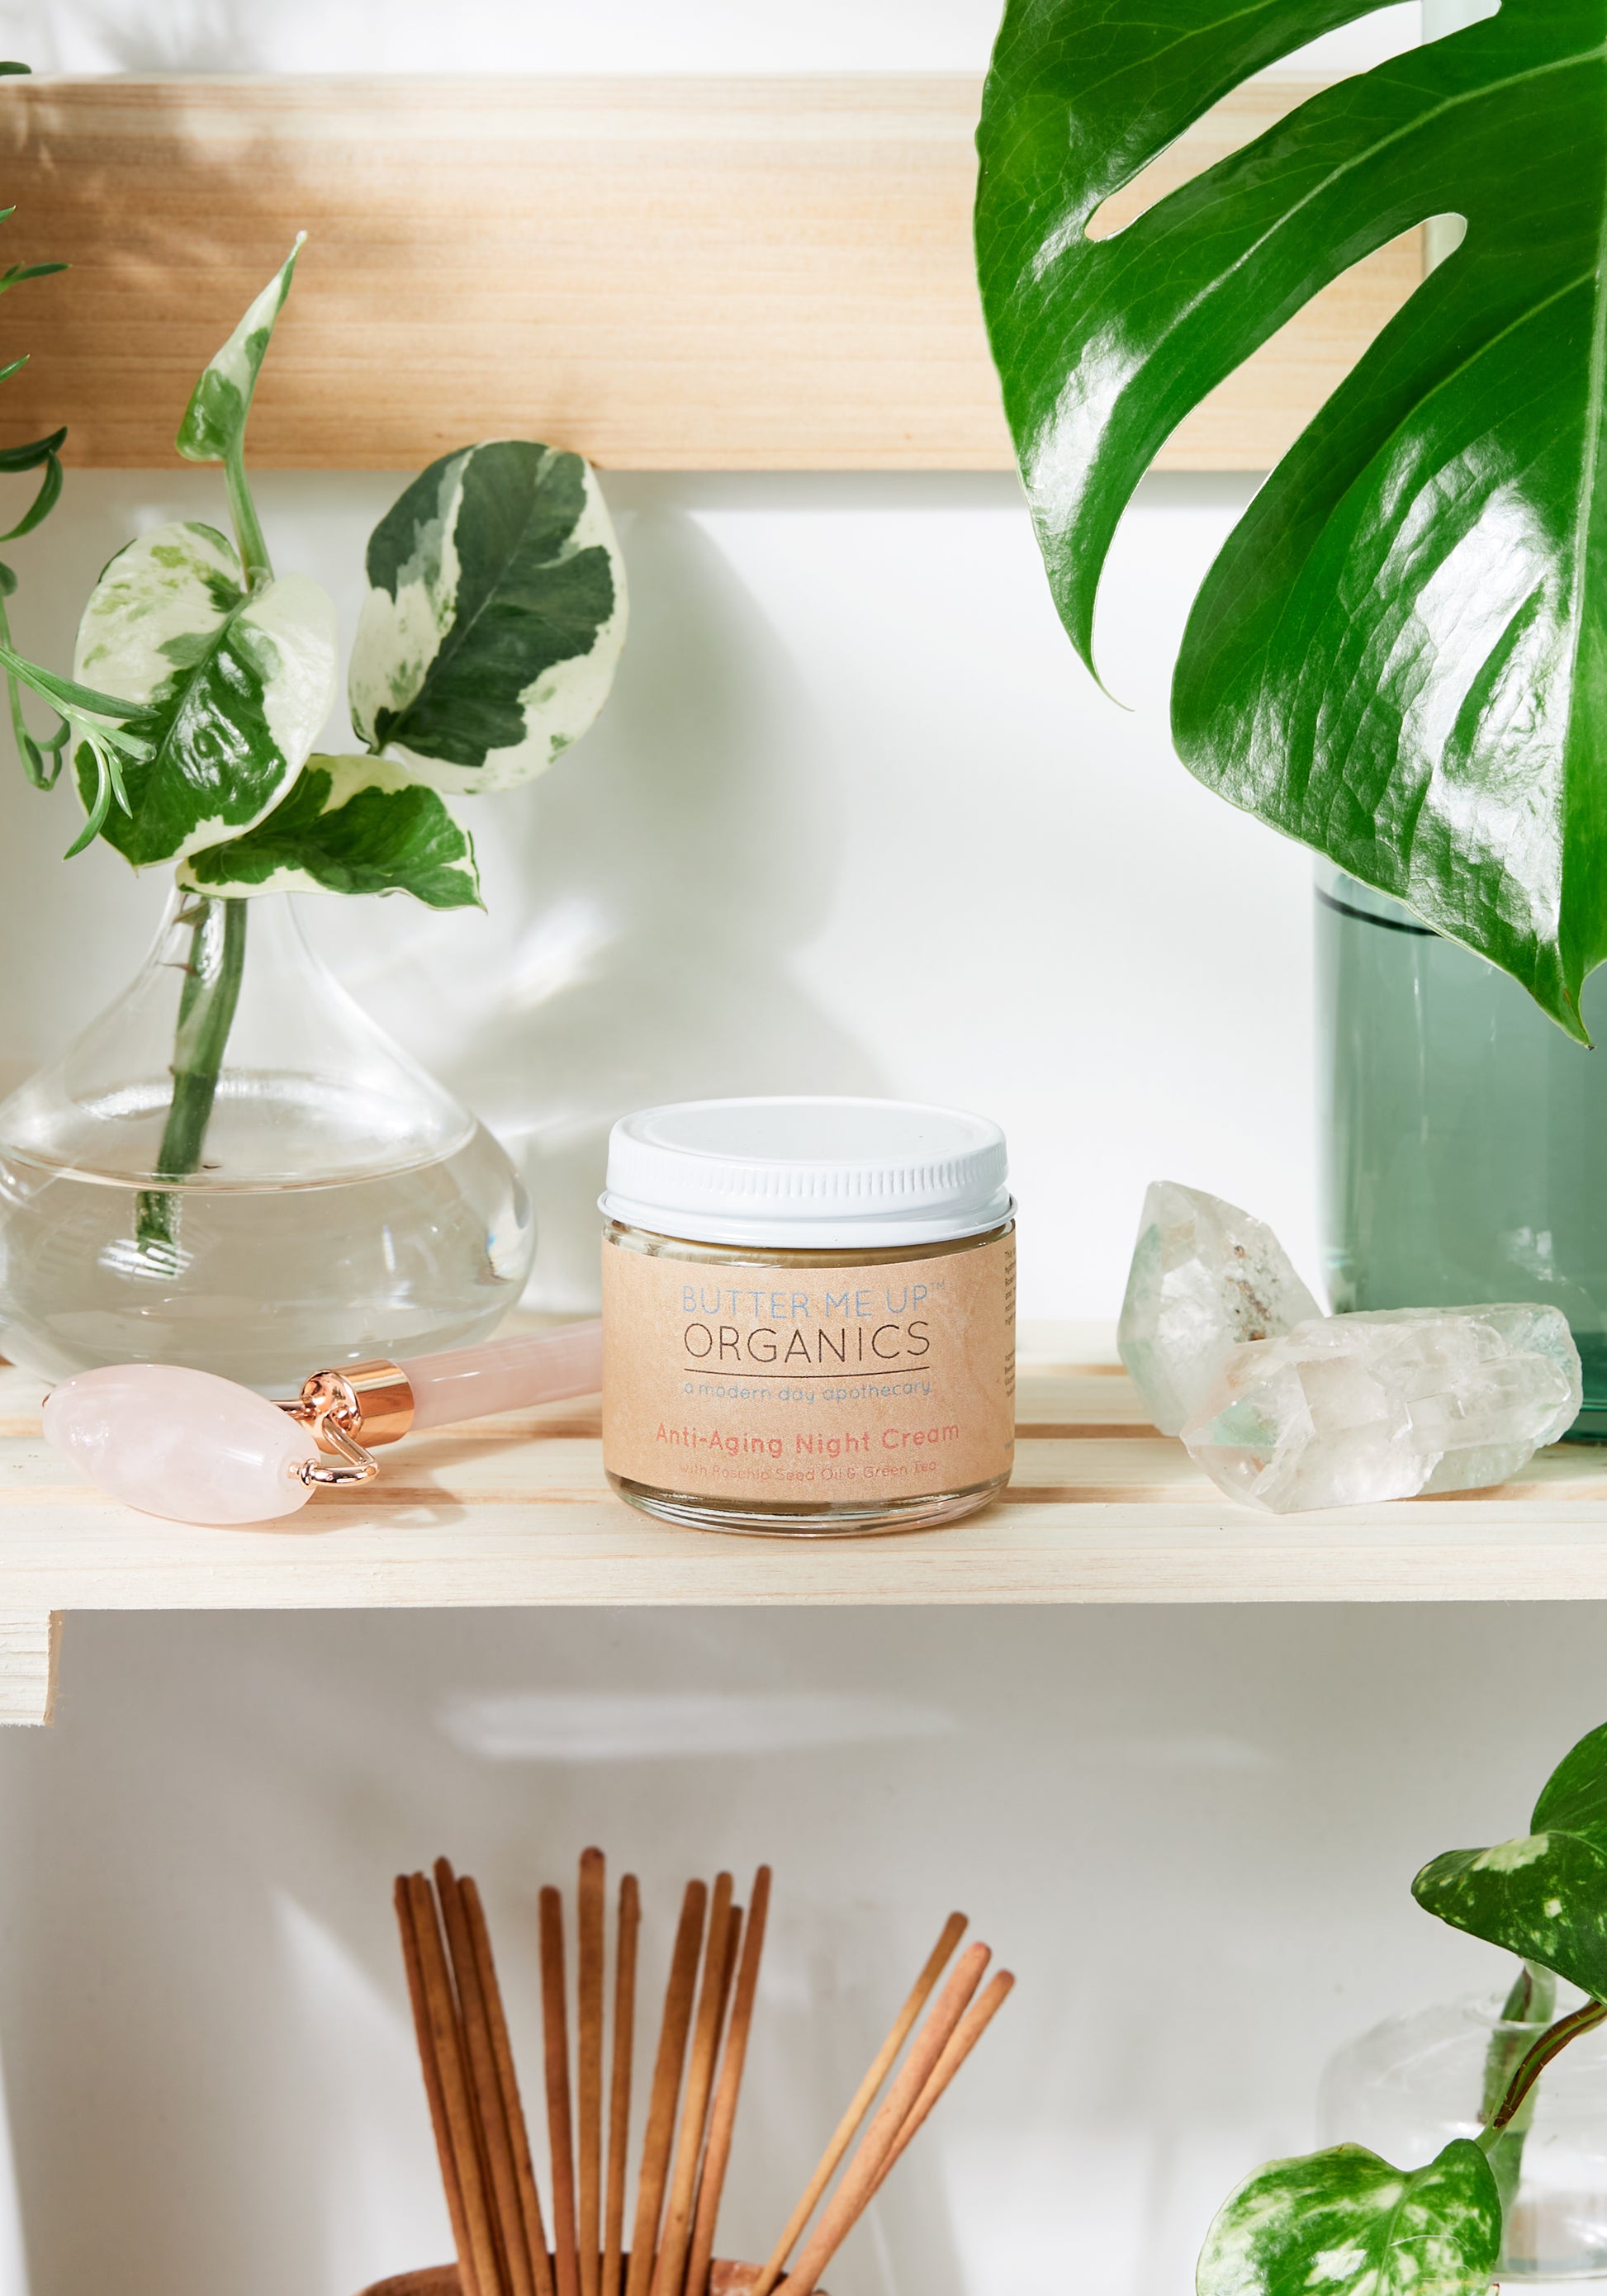 A jar of White Smokey Anti Aging Night Cream Face Moisturizer Organic surrounded by houseplants, crystals, and incense sticks on a wooden shelf.